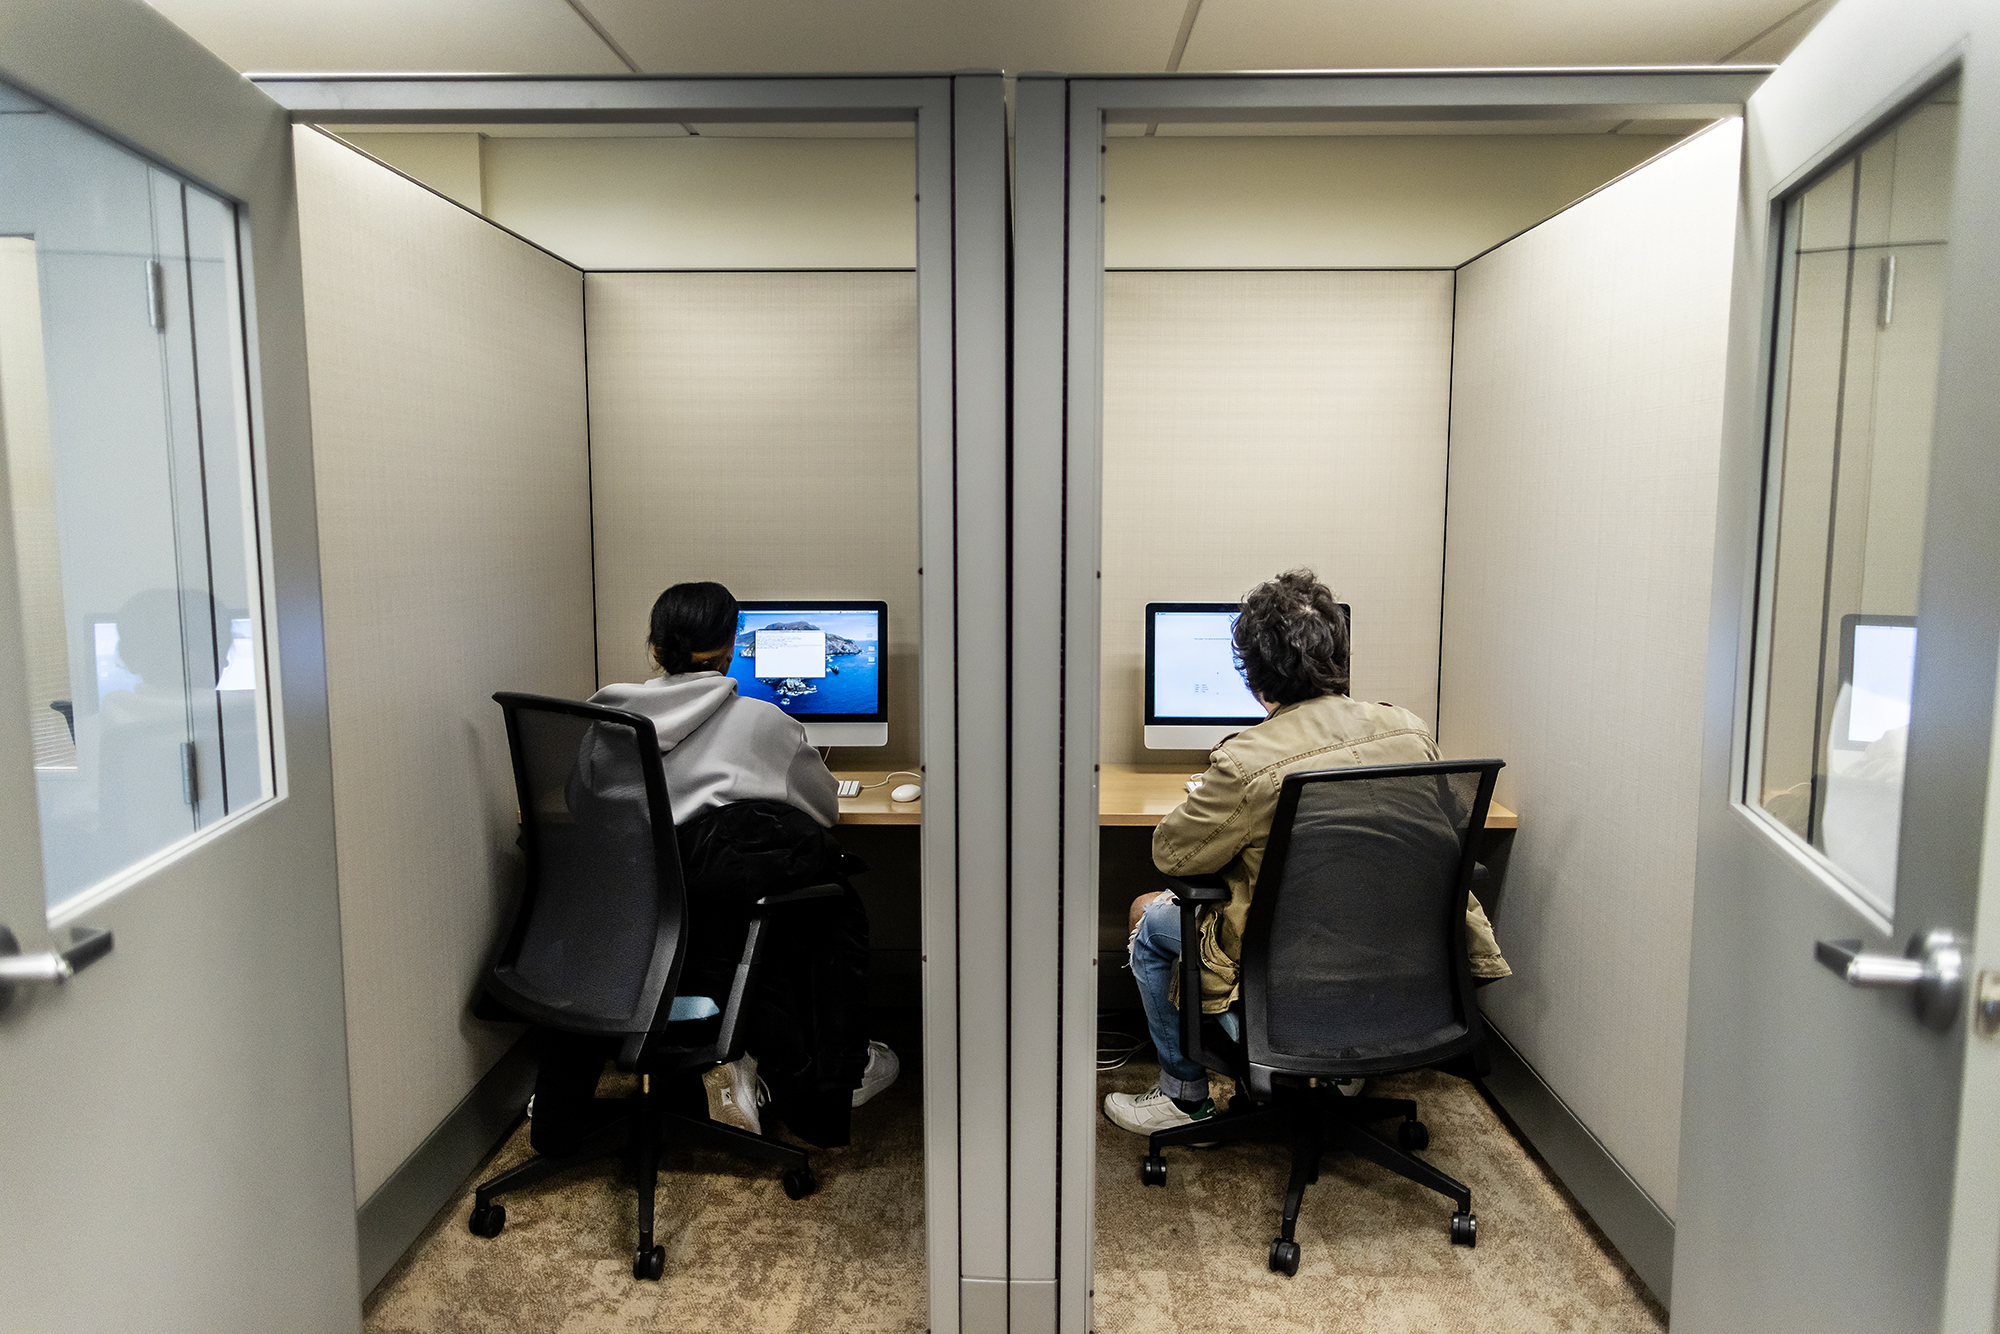 Two people at desktop computers in language lab booths side by side.